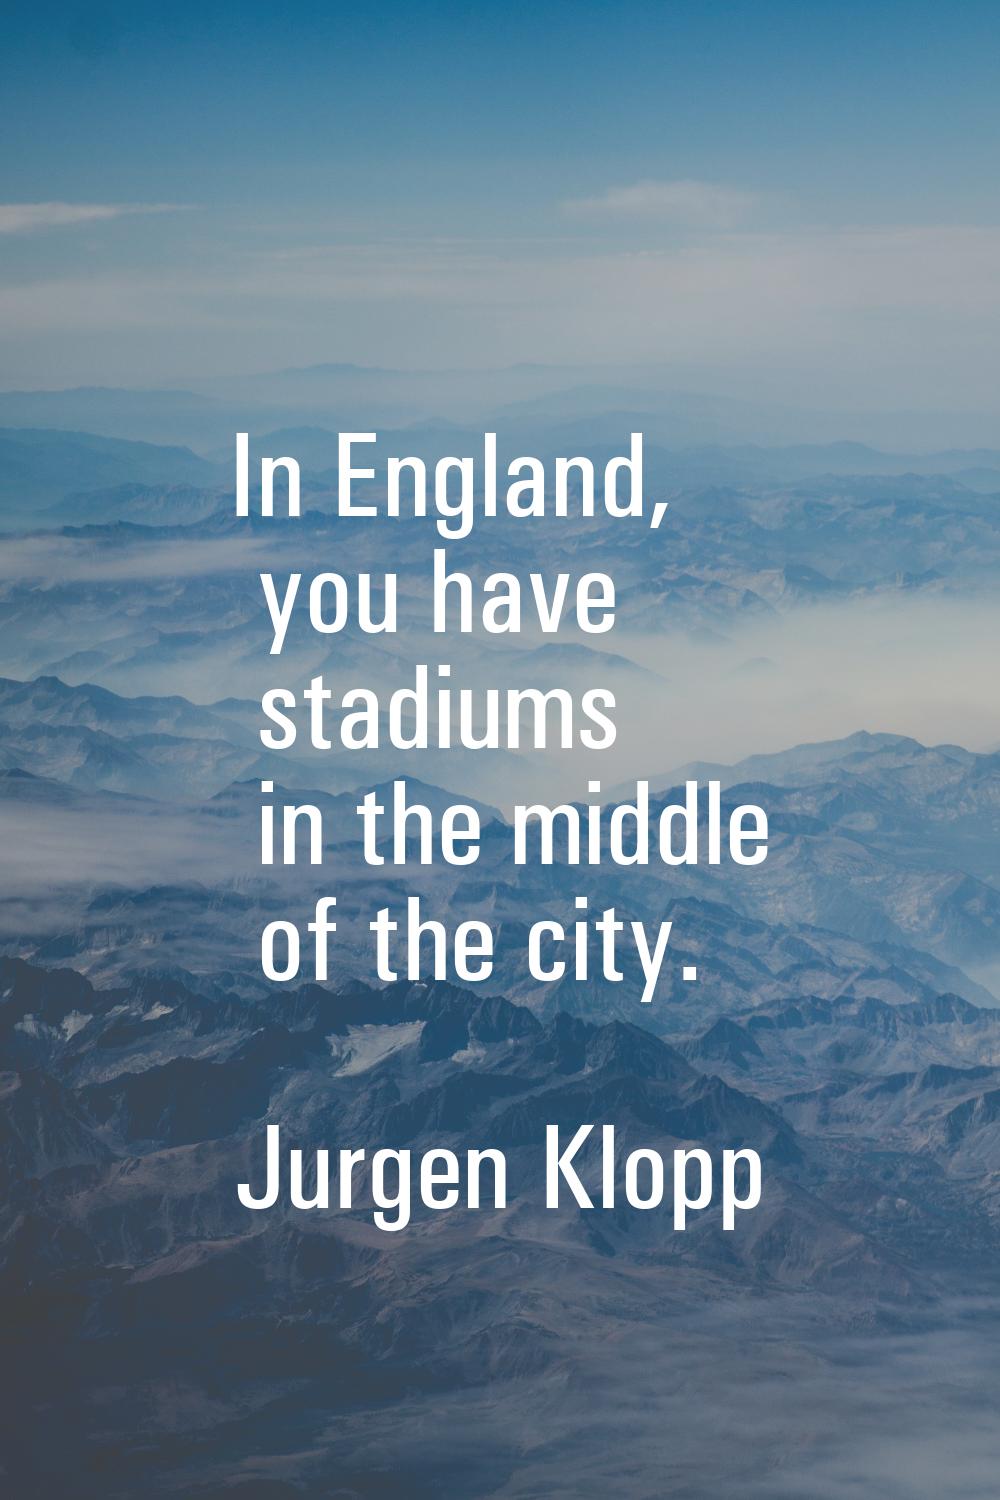 In England, you have stadiums in the middle of the city.